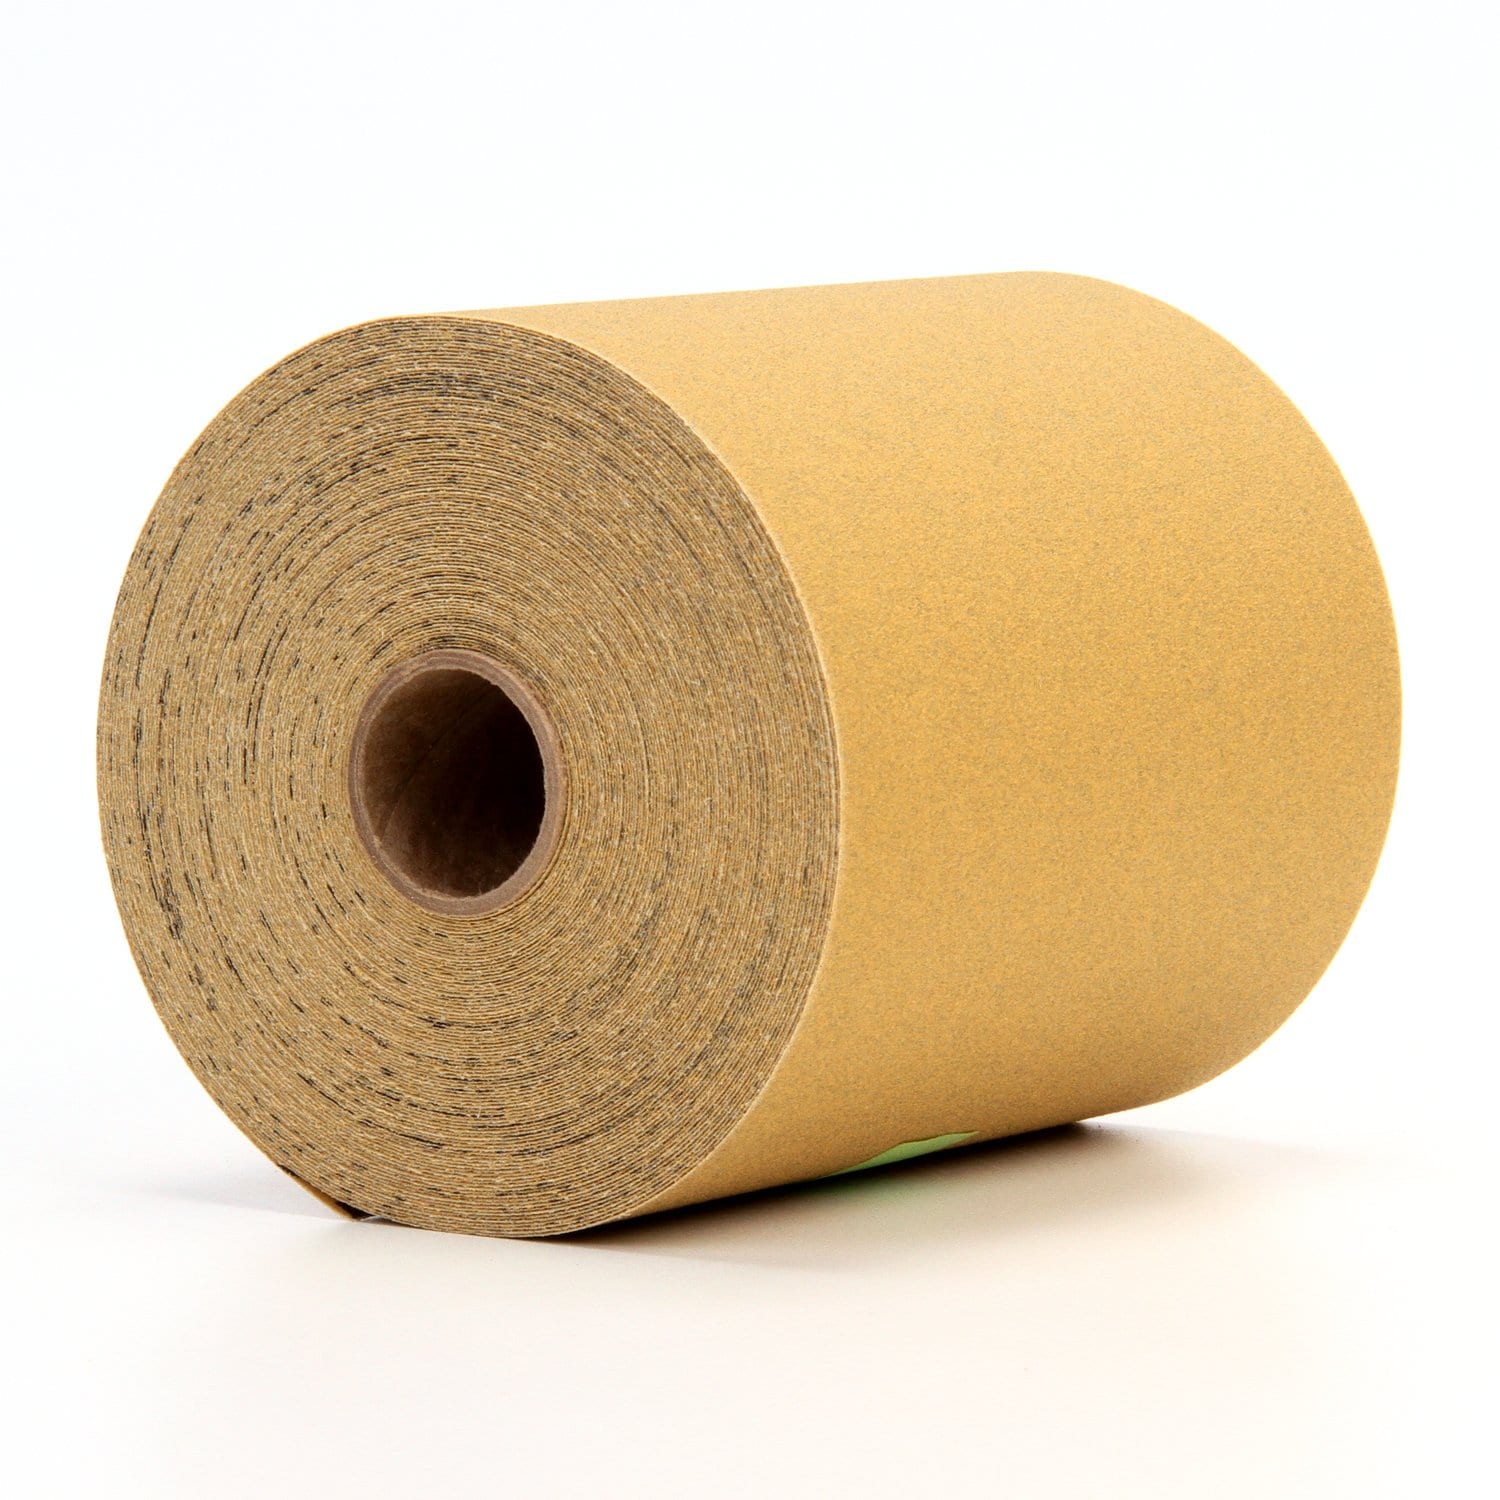 7100070007 - 3M Stikit Paper Roll 236U, P400 C-weight, Config